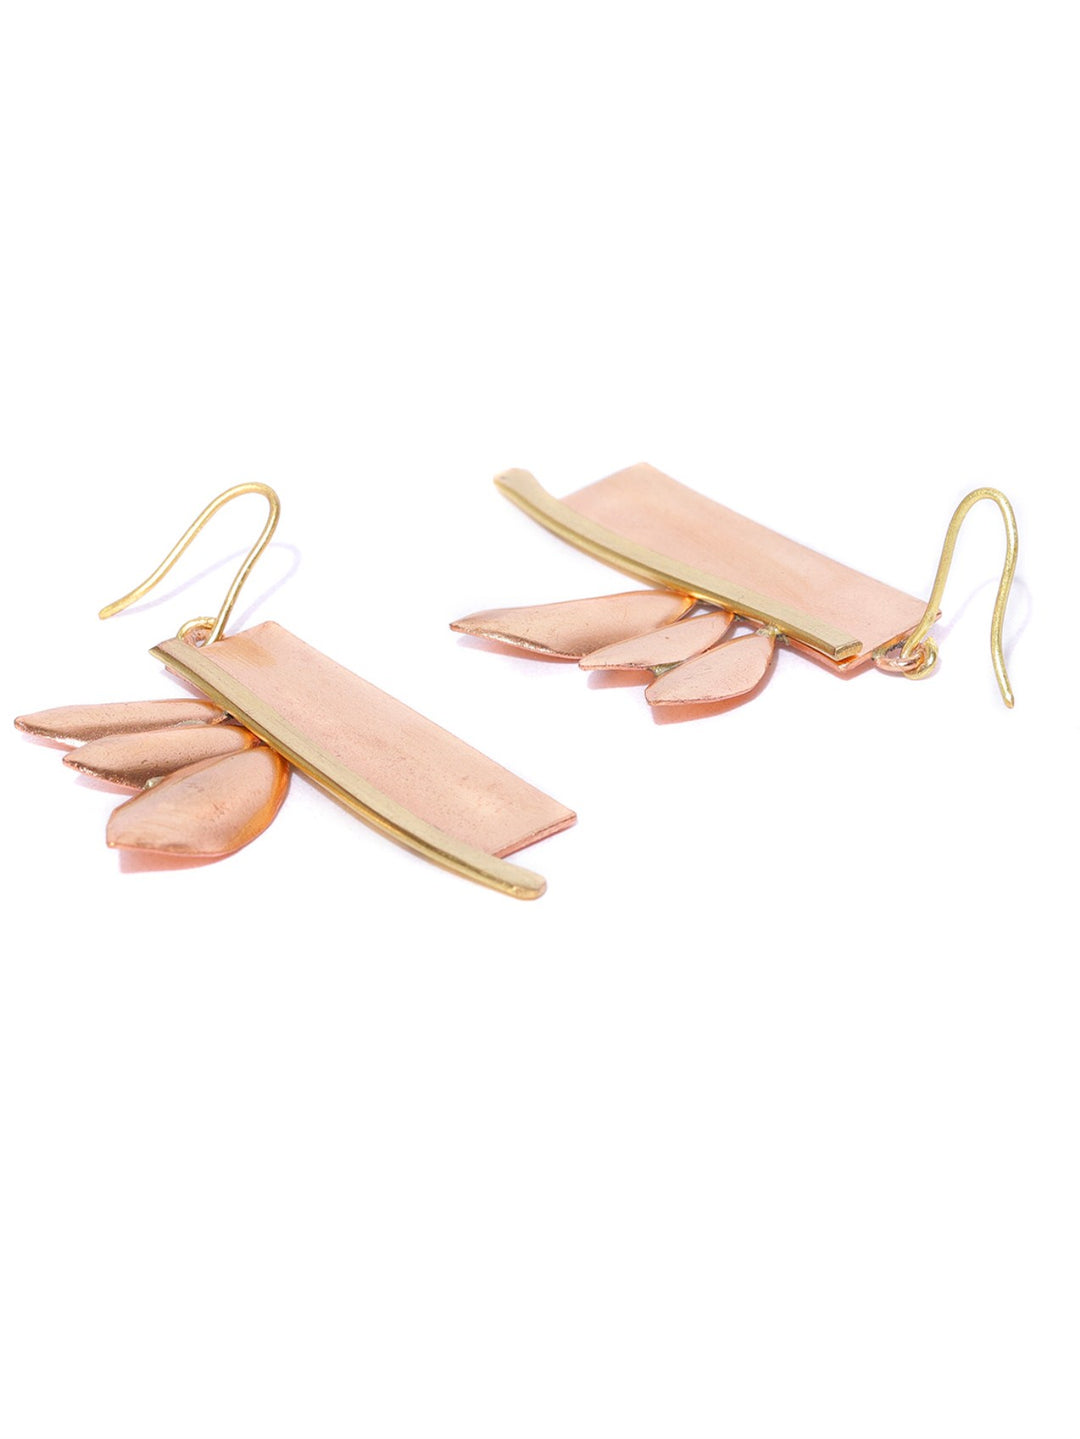 Stylish Gold And Rose Gold Leaf Shaped Drop Earring With Hook For Women And Girls